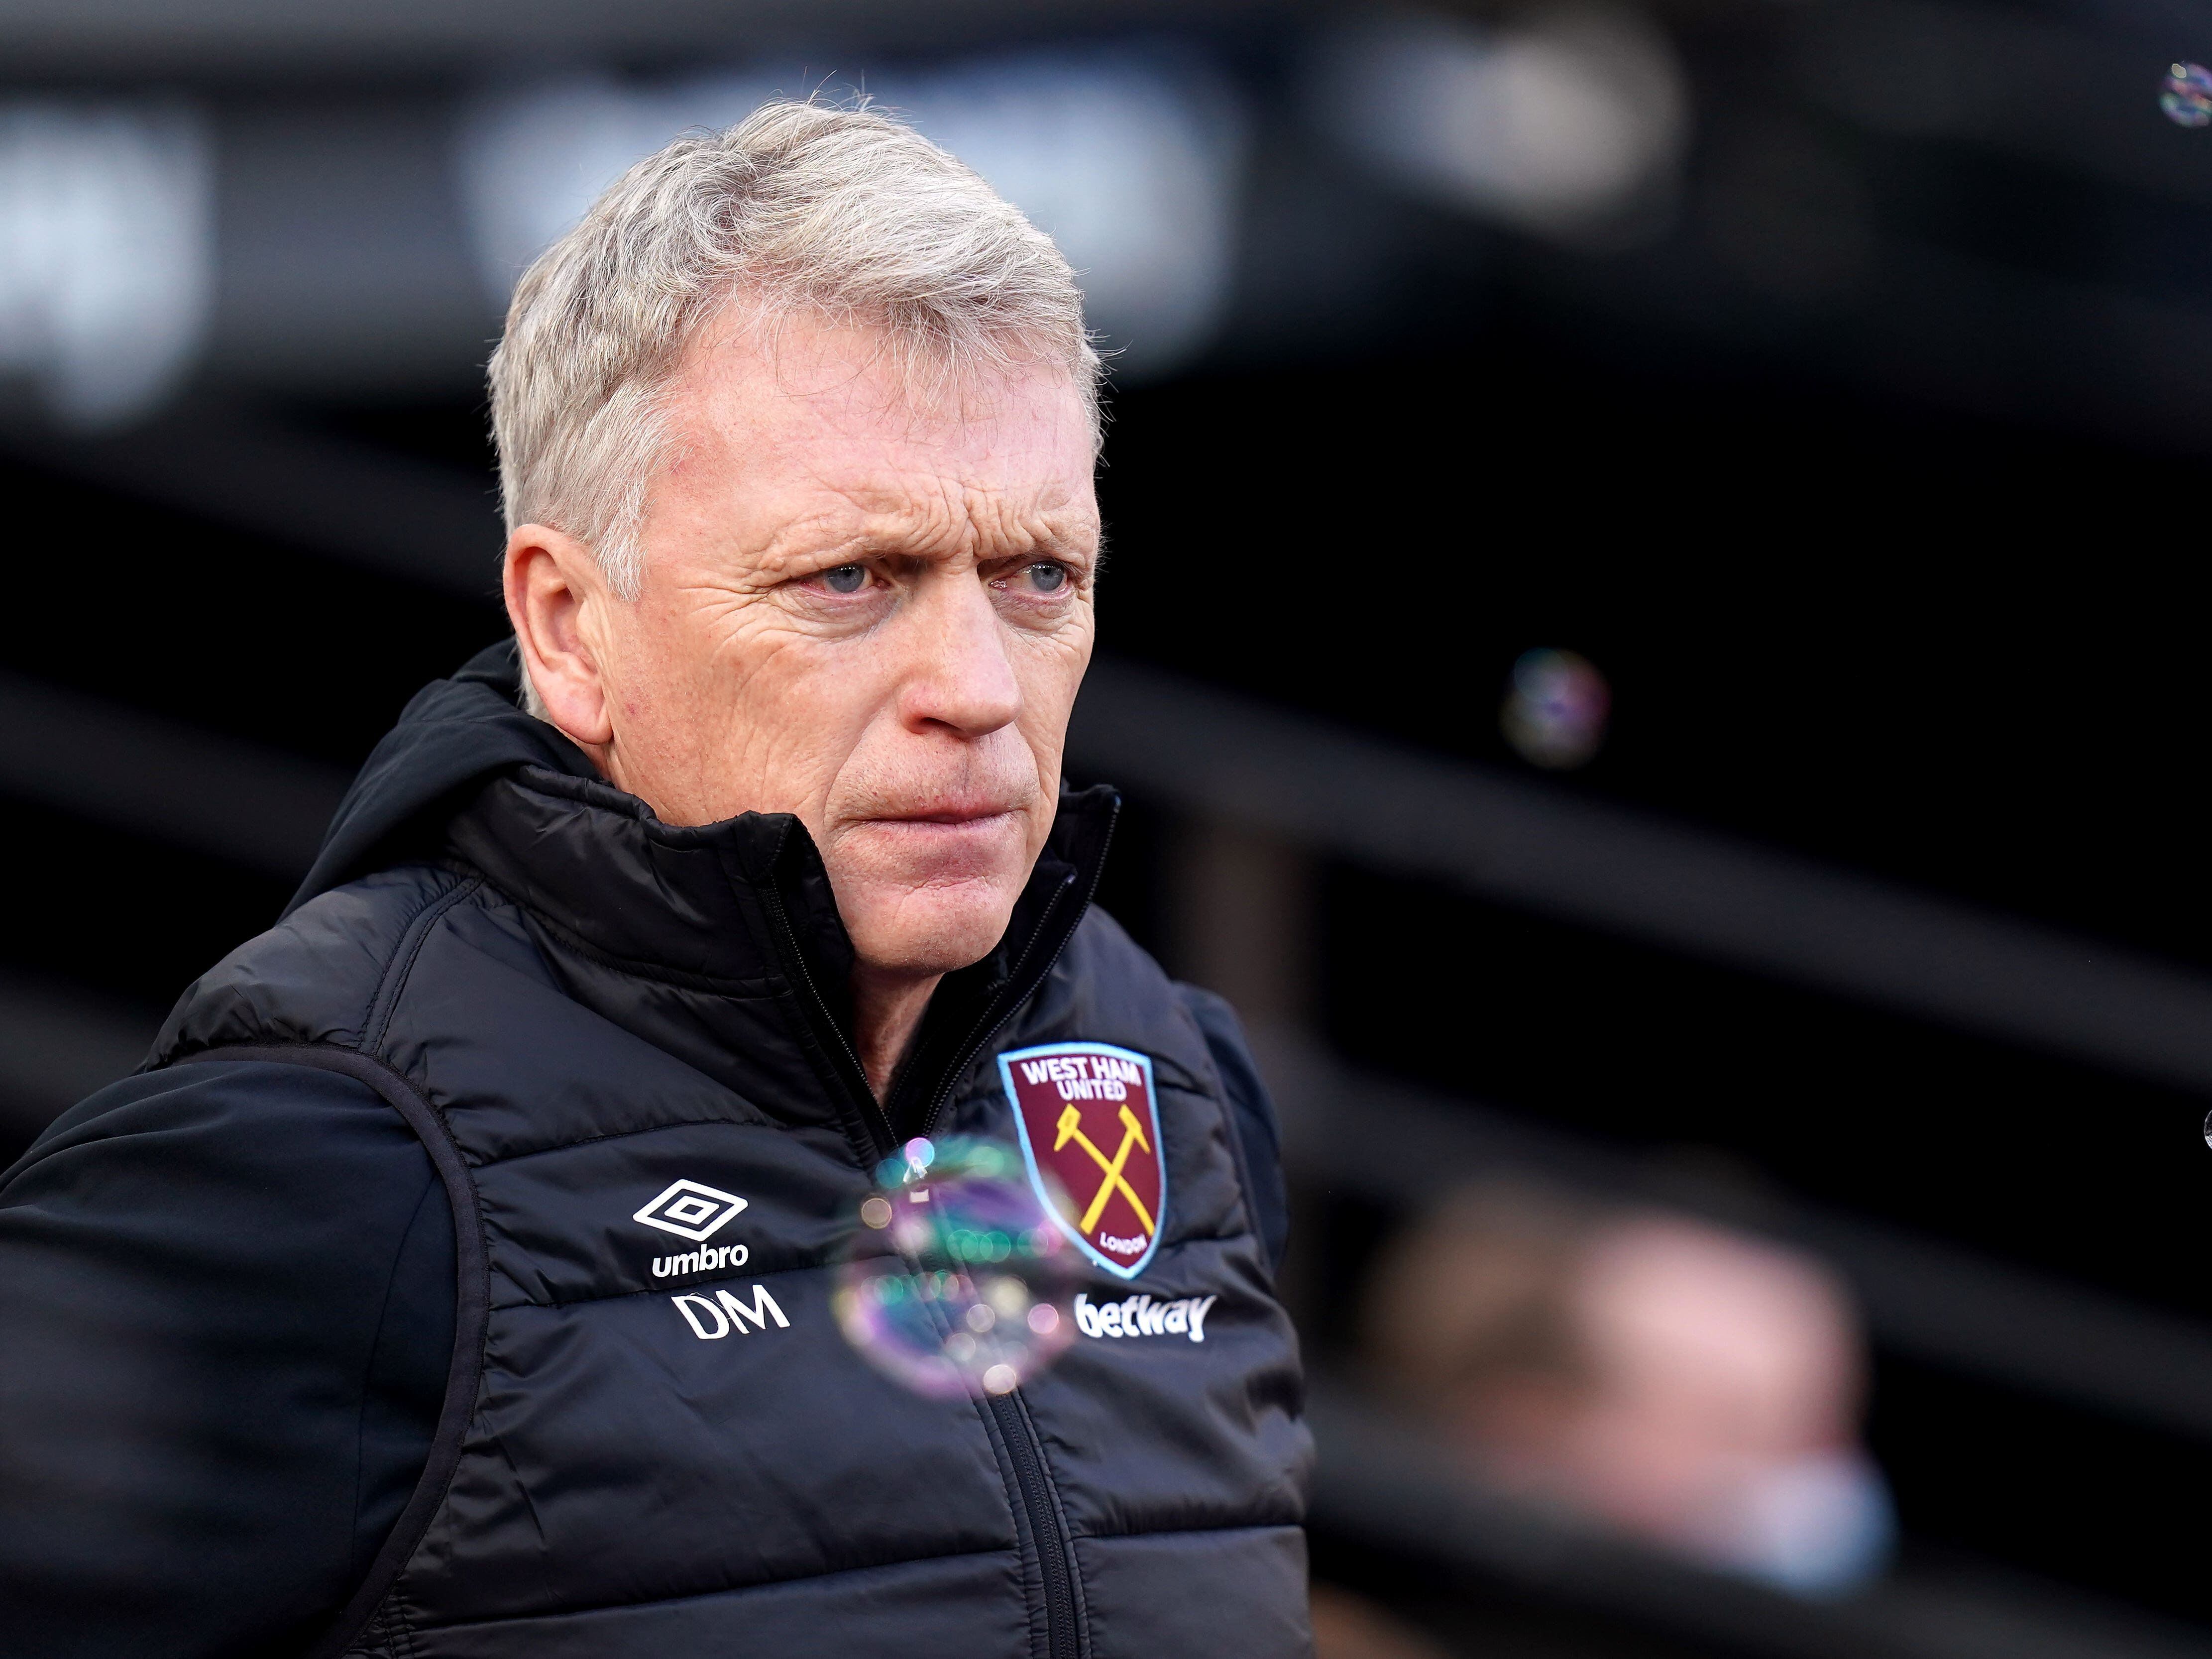 David Moyes hails ‘humble’ Hammers but wants more ‘layers’ to maintain challenge